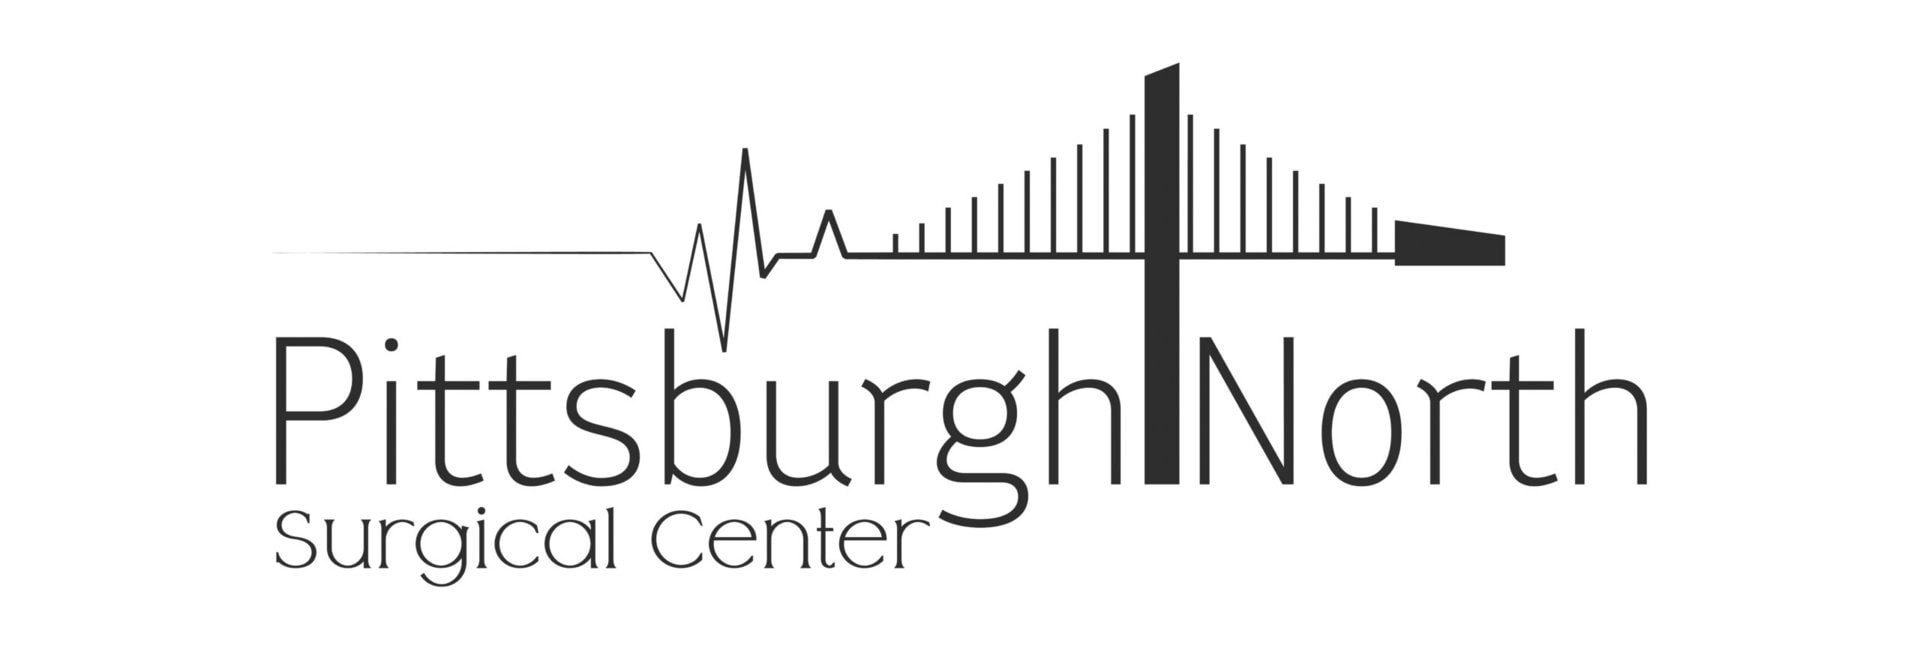 Pittsburgh North Surgical Center